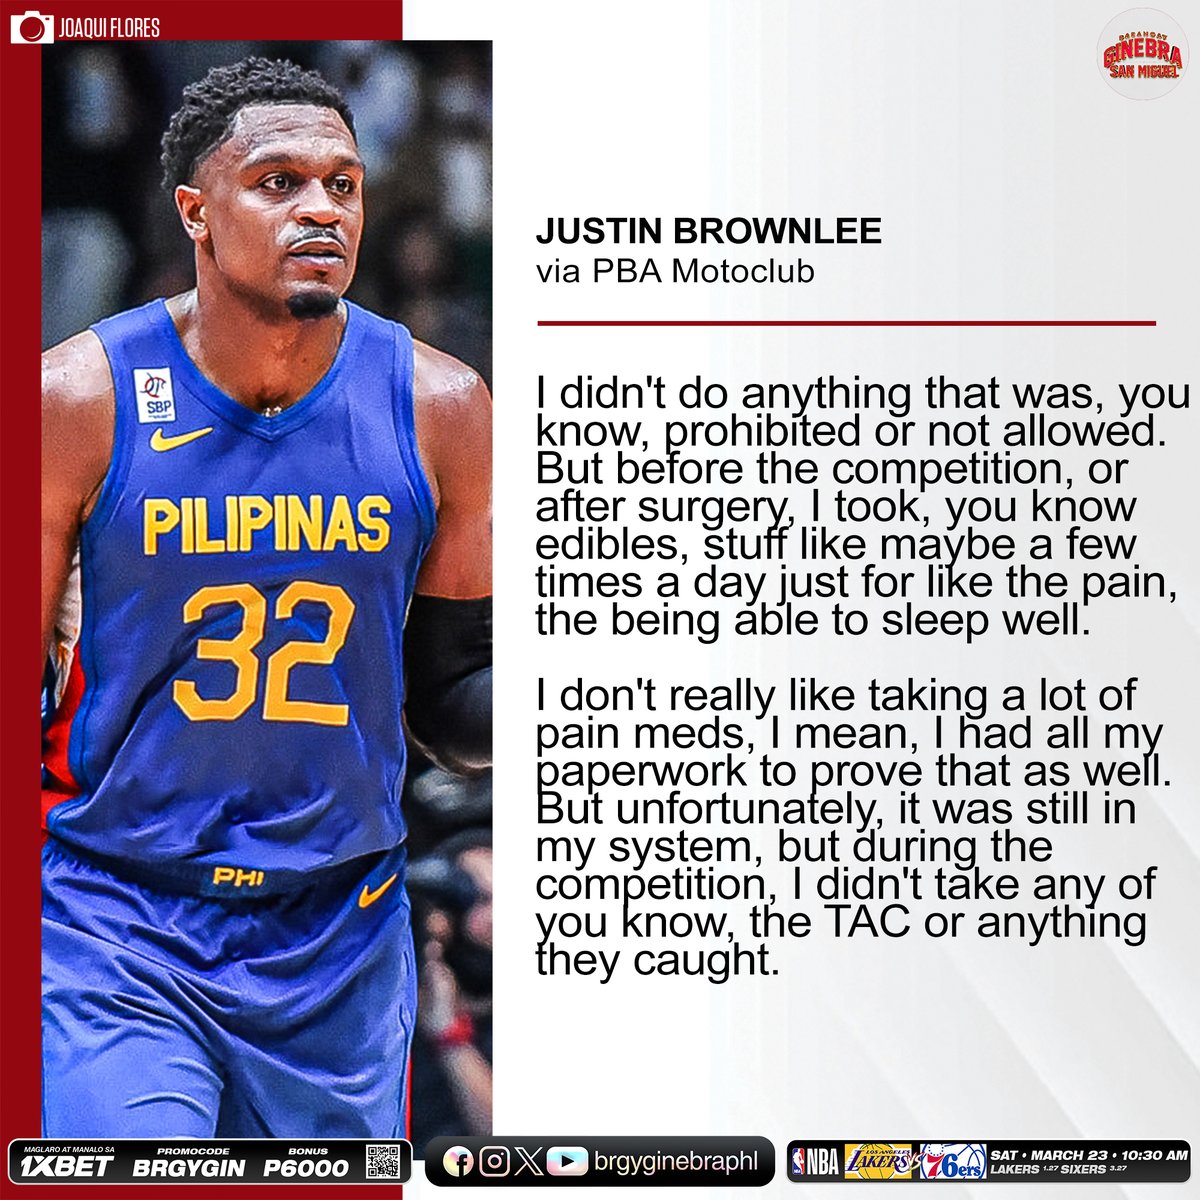 Justin Brownlee set the record straight about his suspension from last year.